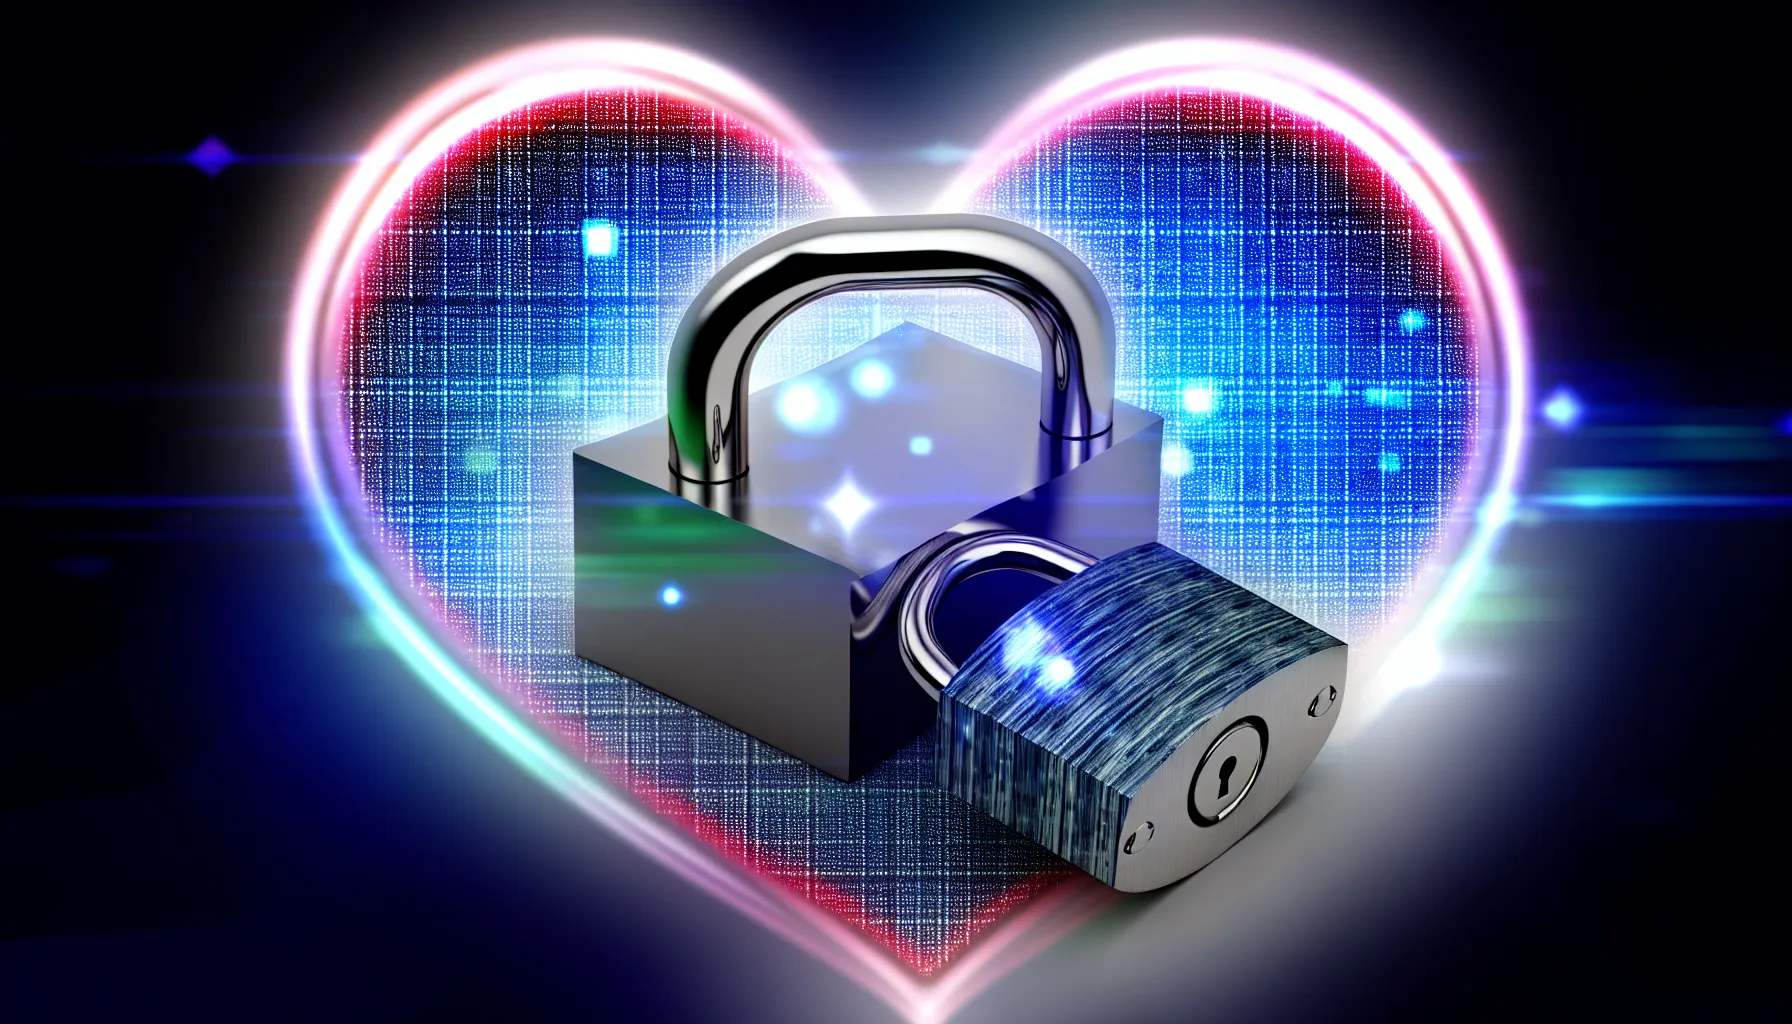 <strong>Love Locked:</strong> As the heart finds solace in the steadfast security measures of <strong>SeduceYou</strong>, each member's journey towards affection is safeguarded with unwavering digital diligence.